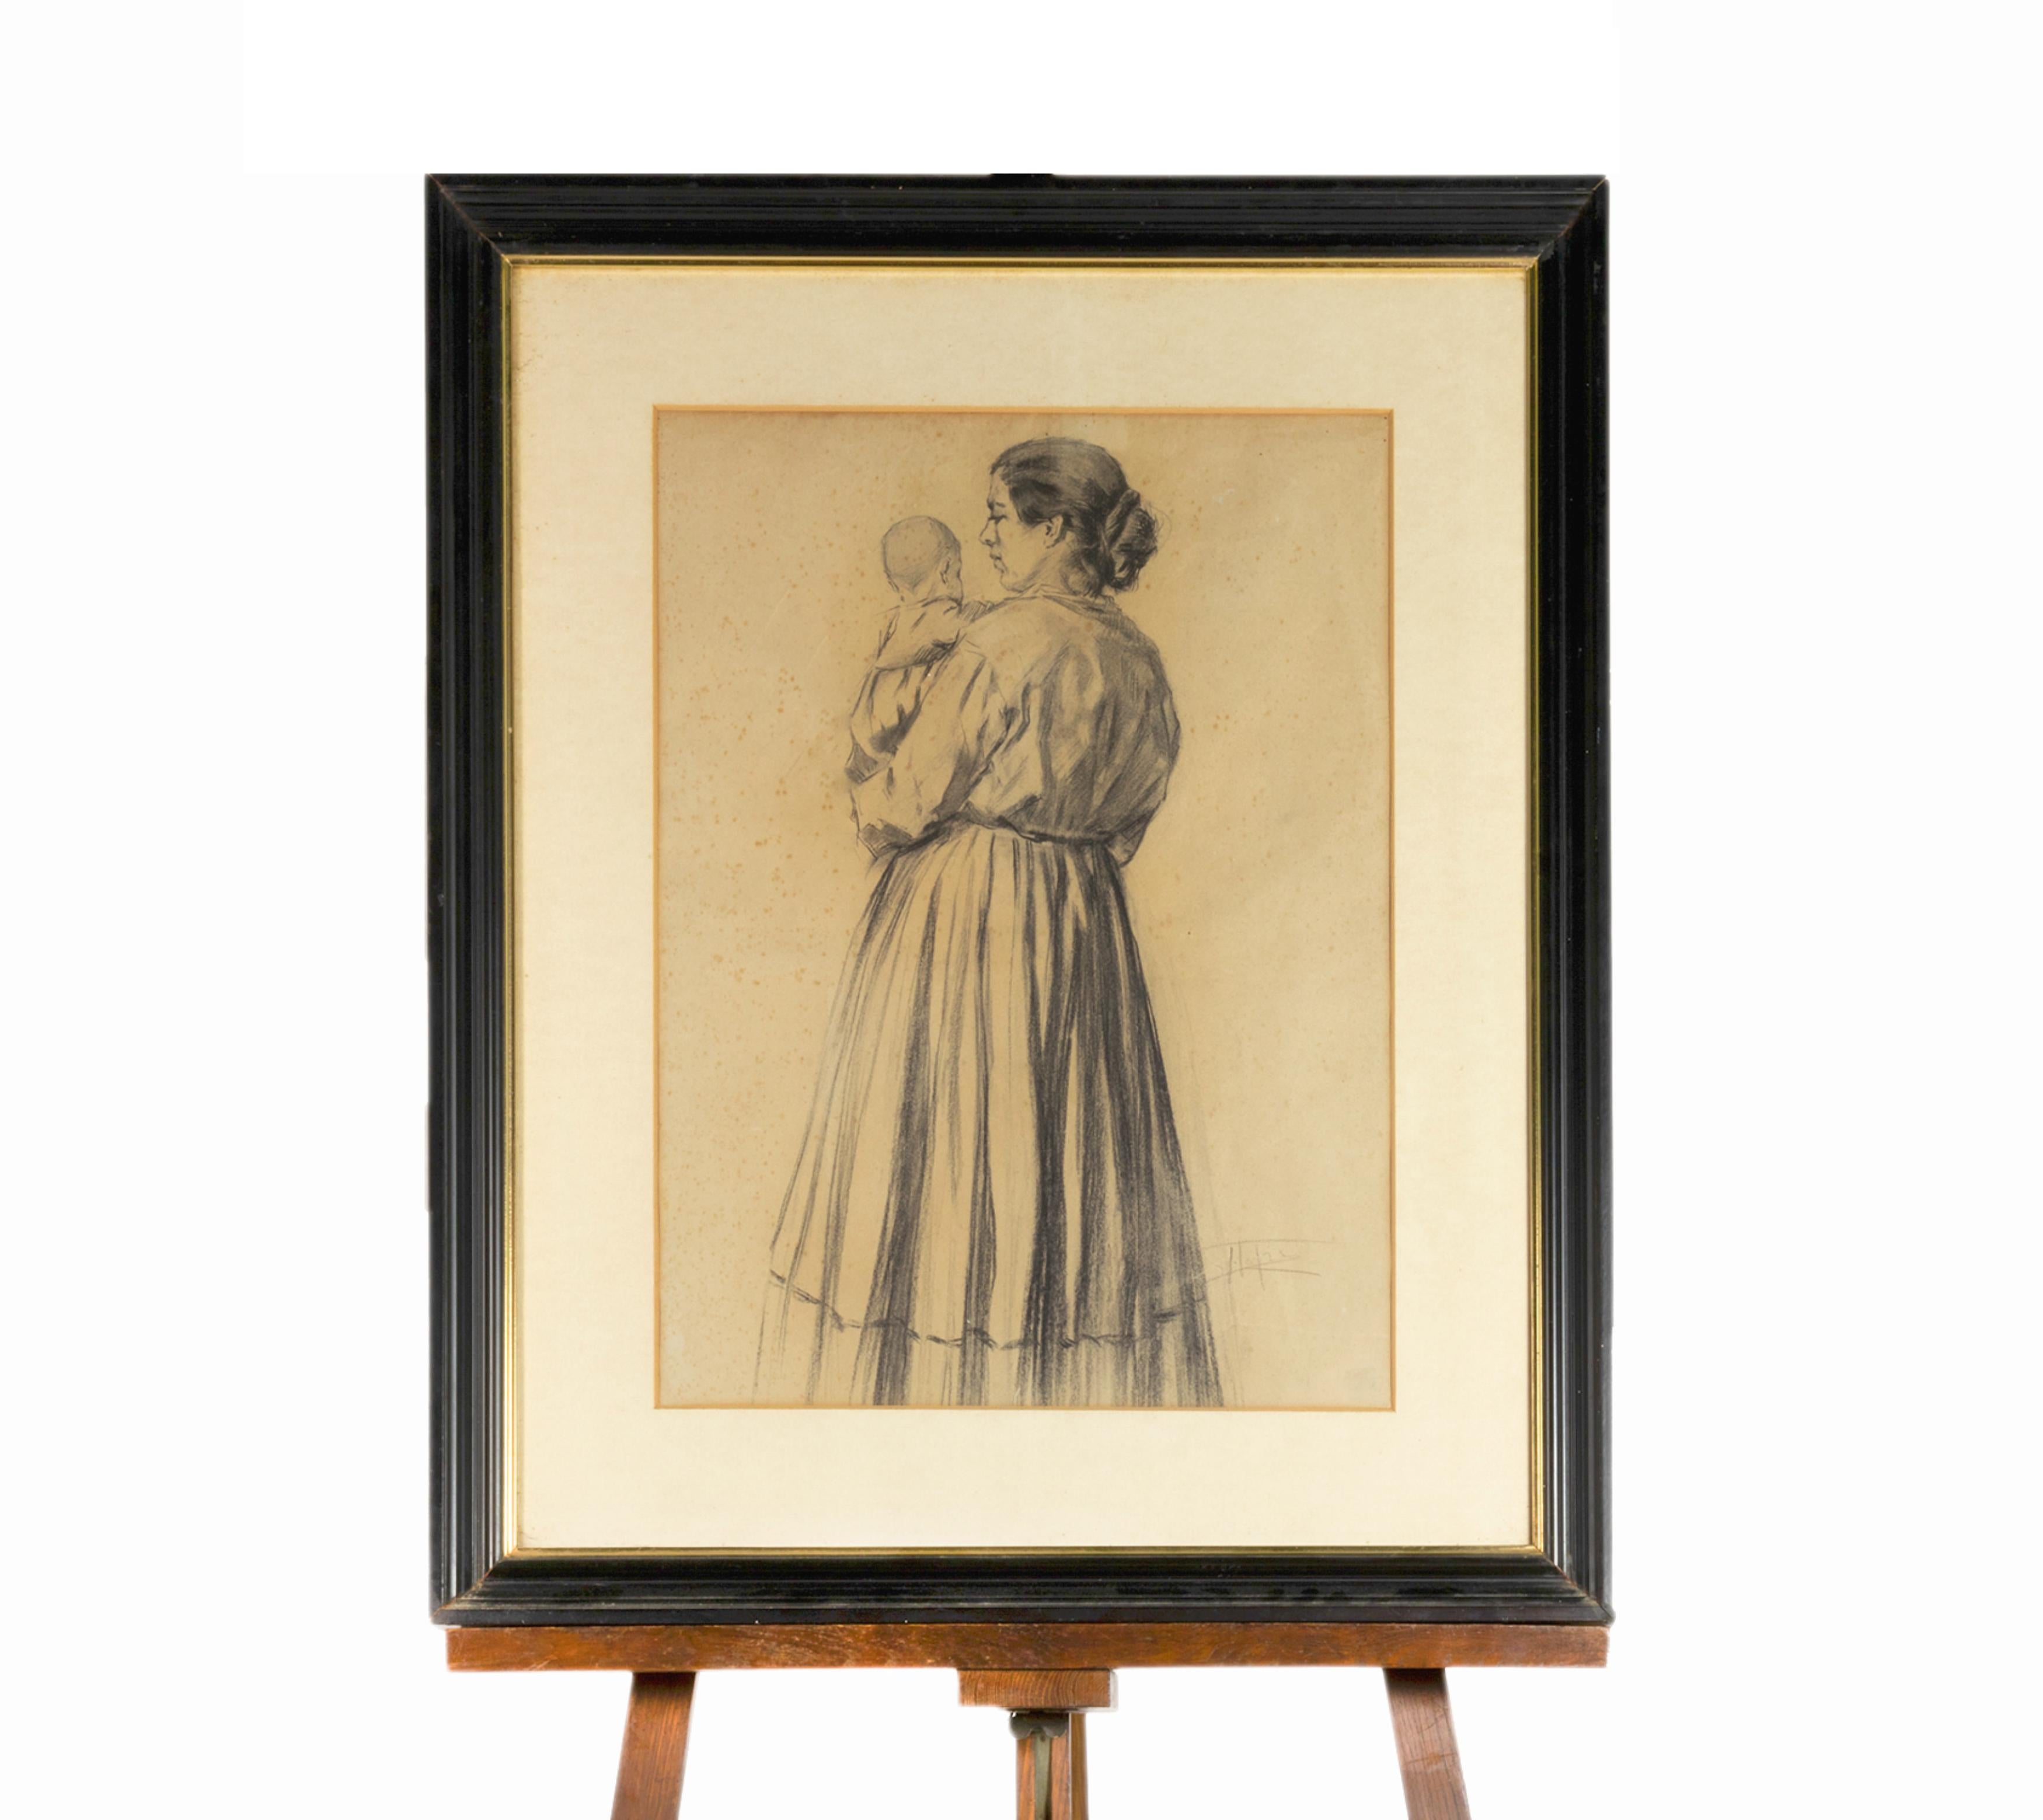 A charcoal drawing of a Mother with a boy on her lap, created and signed by Joaquim Francisco Lopes artist that exemplifies the essence of the primitive Modernism movement in Portugal.

Joaquim Francisco Lopes, painter of the first generation of